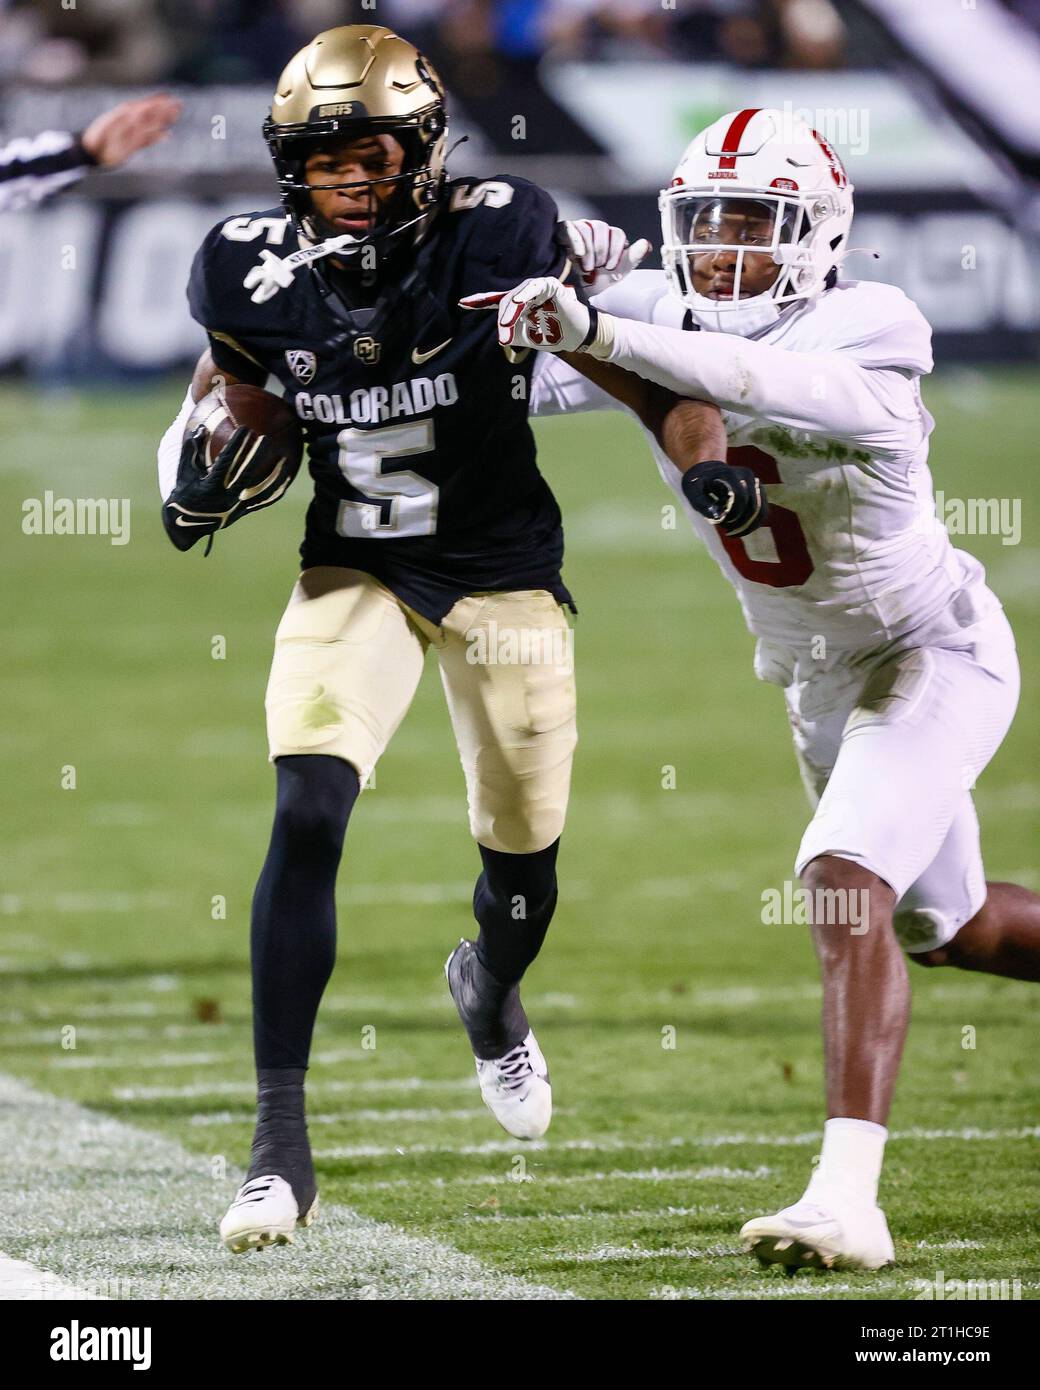 Colorado wide receiver Jimmy Horn Jr. celebrates after catching a touchdown  against Colorado State in the second half of an NCAA college football game  Saturday, Sept. 16, 2023, in Boulder, Colo. (AP